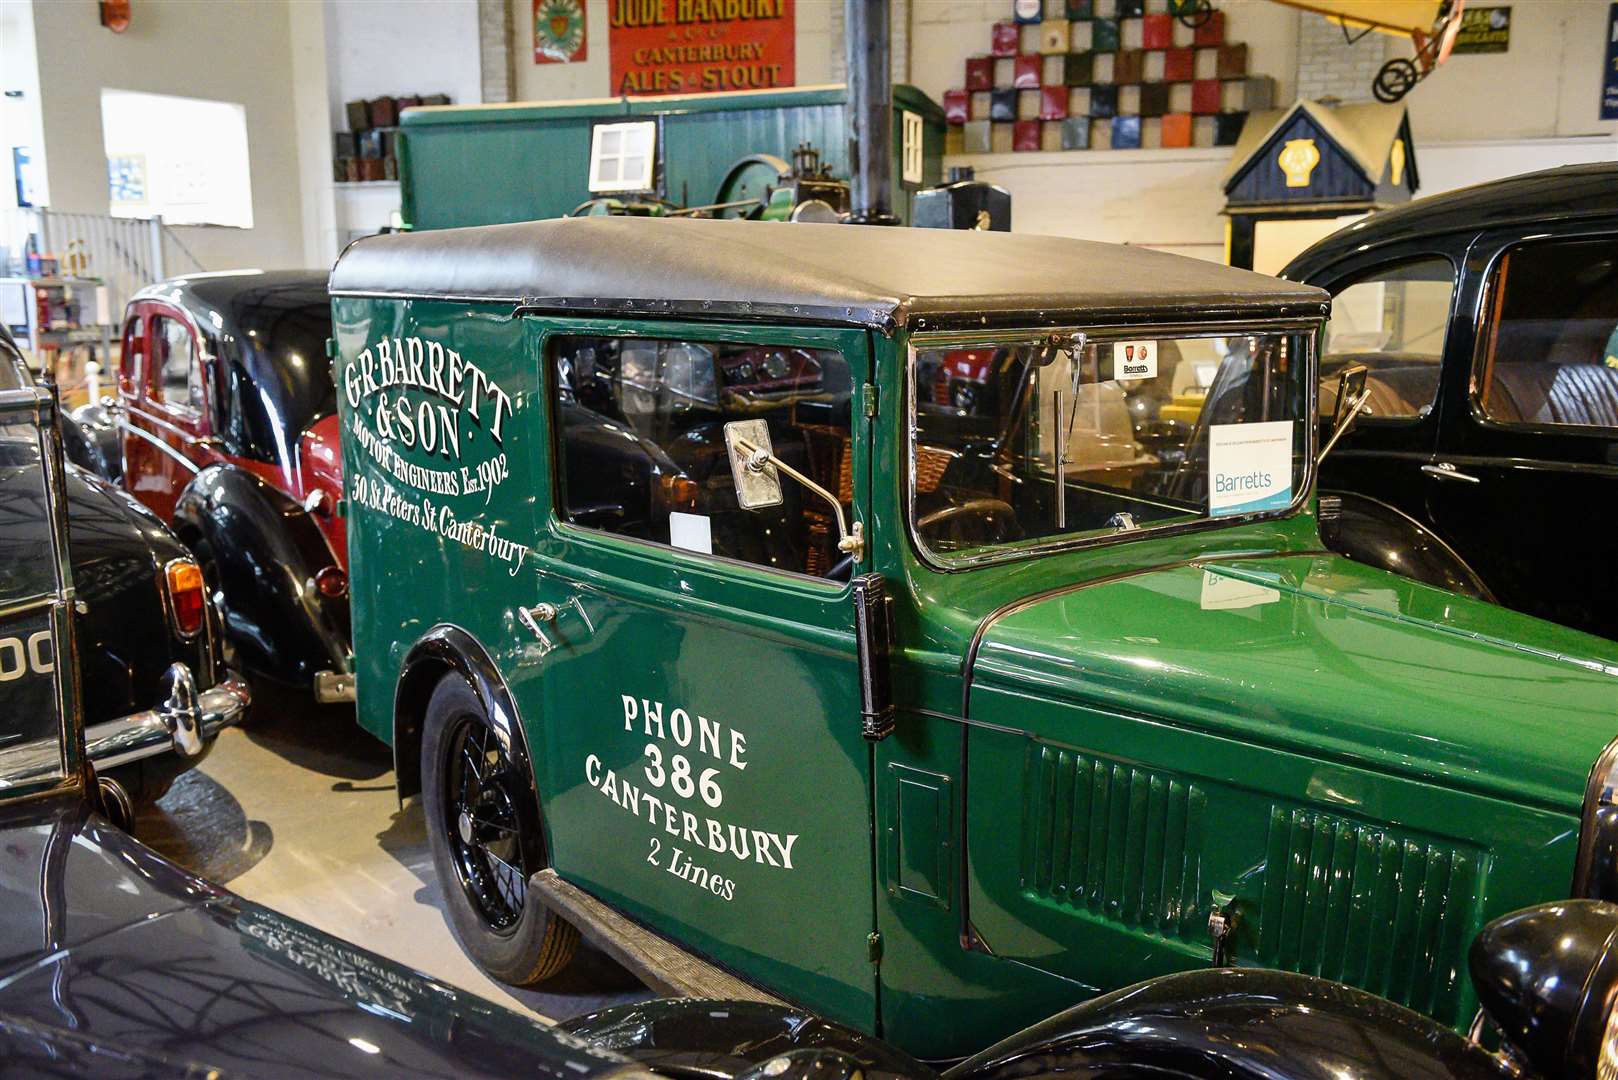 An Austin 7 delivery van on loan from Barretts of Canterbury